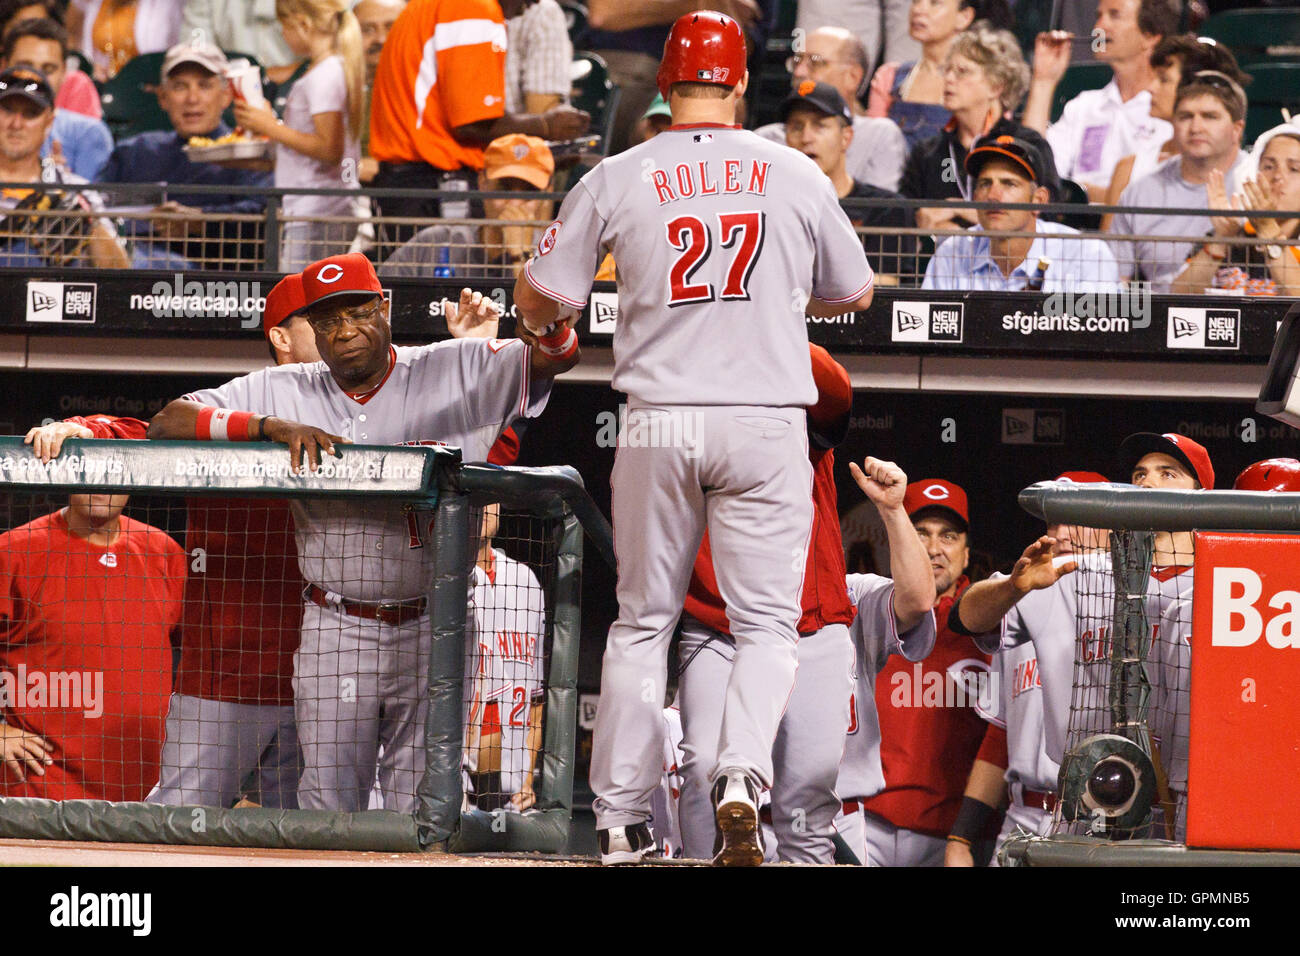 August 24, 2010; San Francisco, CA, USA;  Cincinnati Reds third baseman Scott Rolen (27) is congratulated by manager Dusty Baker (left) and teammates after hitting a two run home run against the San Francisco Giants during the fifth inning at AT&T Park. Stock Photo